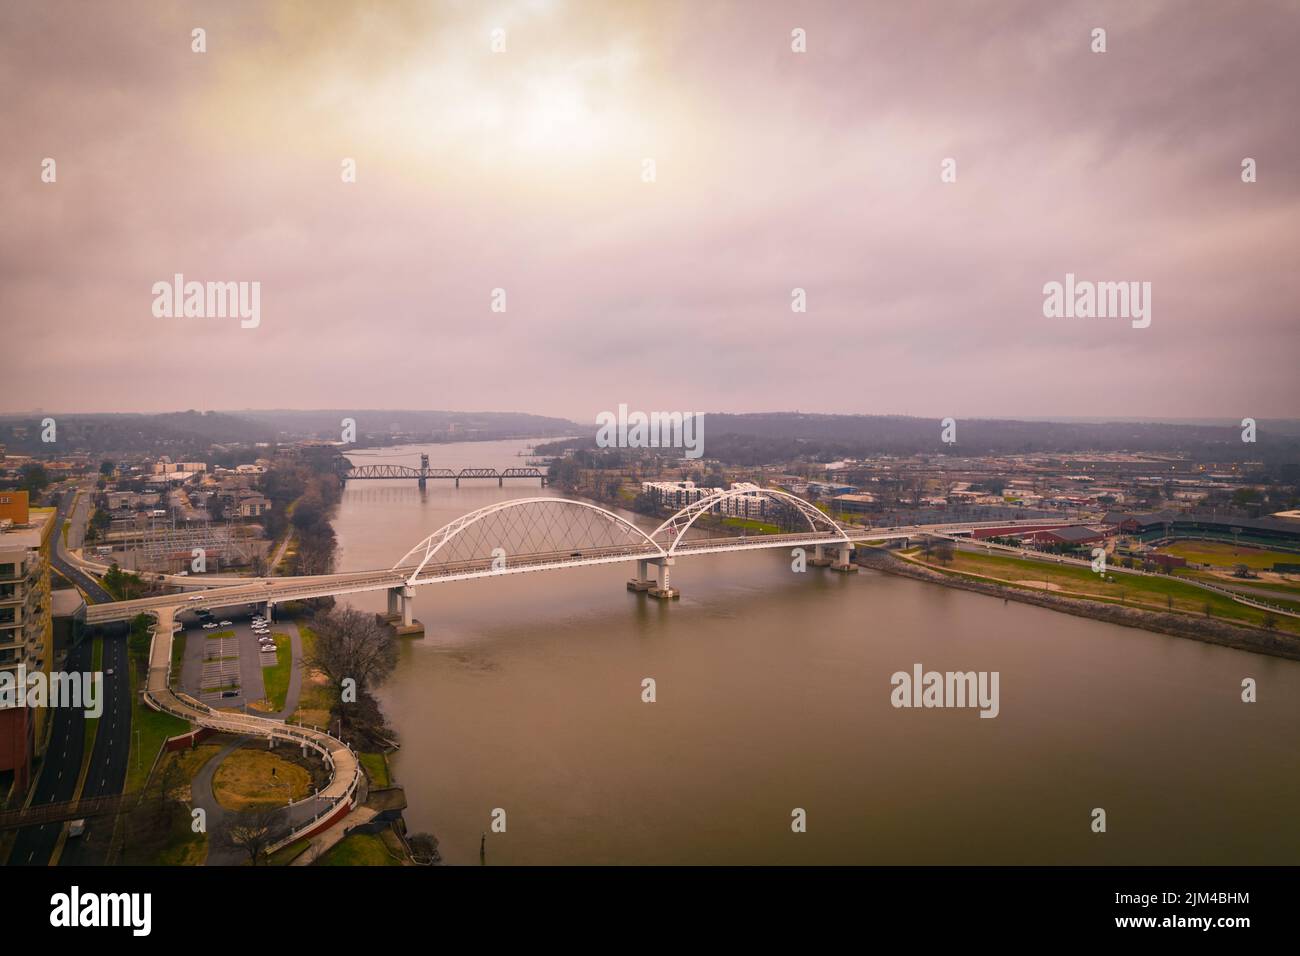 An aerial view of the Broadway Bridge over the river in Pulaski County, Arkansas against a bright sunset cloudy sky Stock Photo